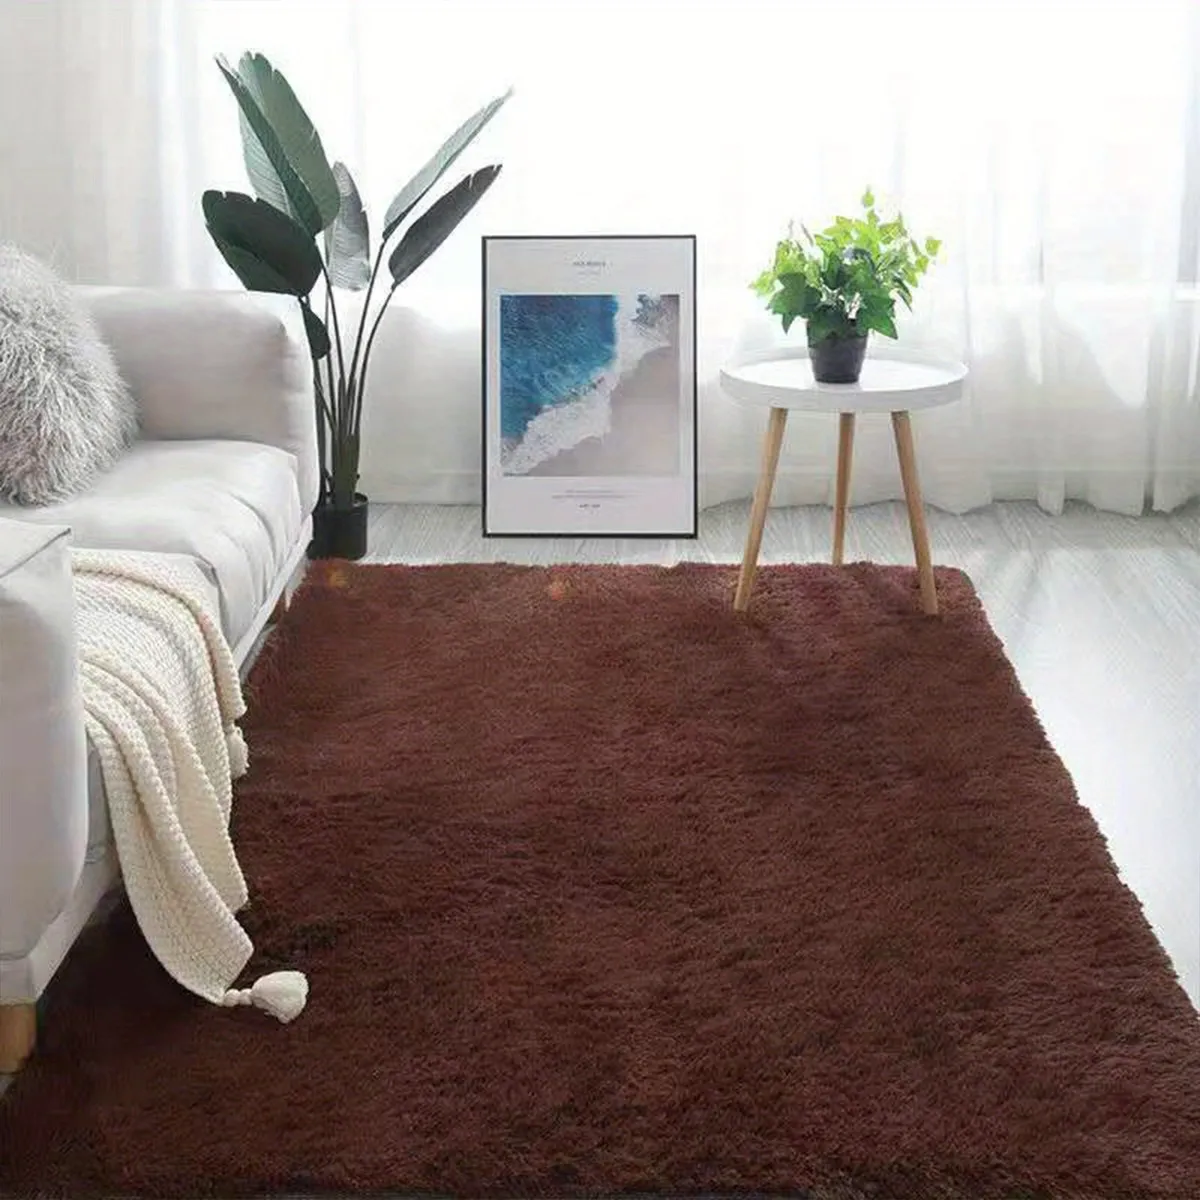 Transform Your Living Room with a Soft & Fluffy Plush Shag Area Rug - Non-Slip & Machine Washable!